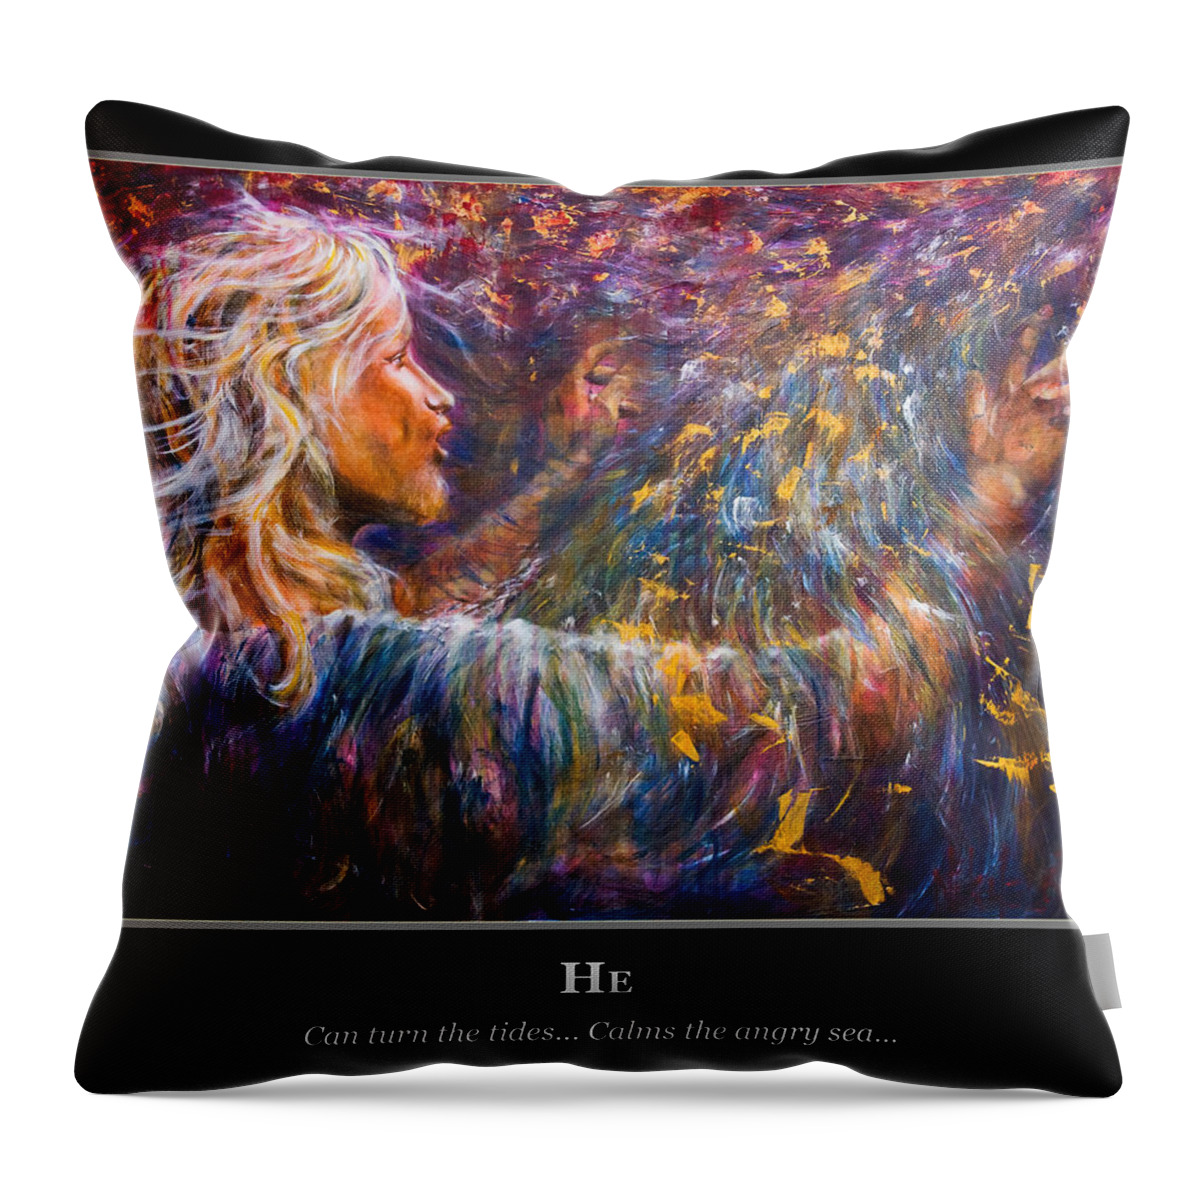 Jesus Throw Pillow featuring the painting Motivational He Jesus by Nik Helbig